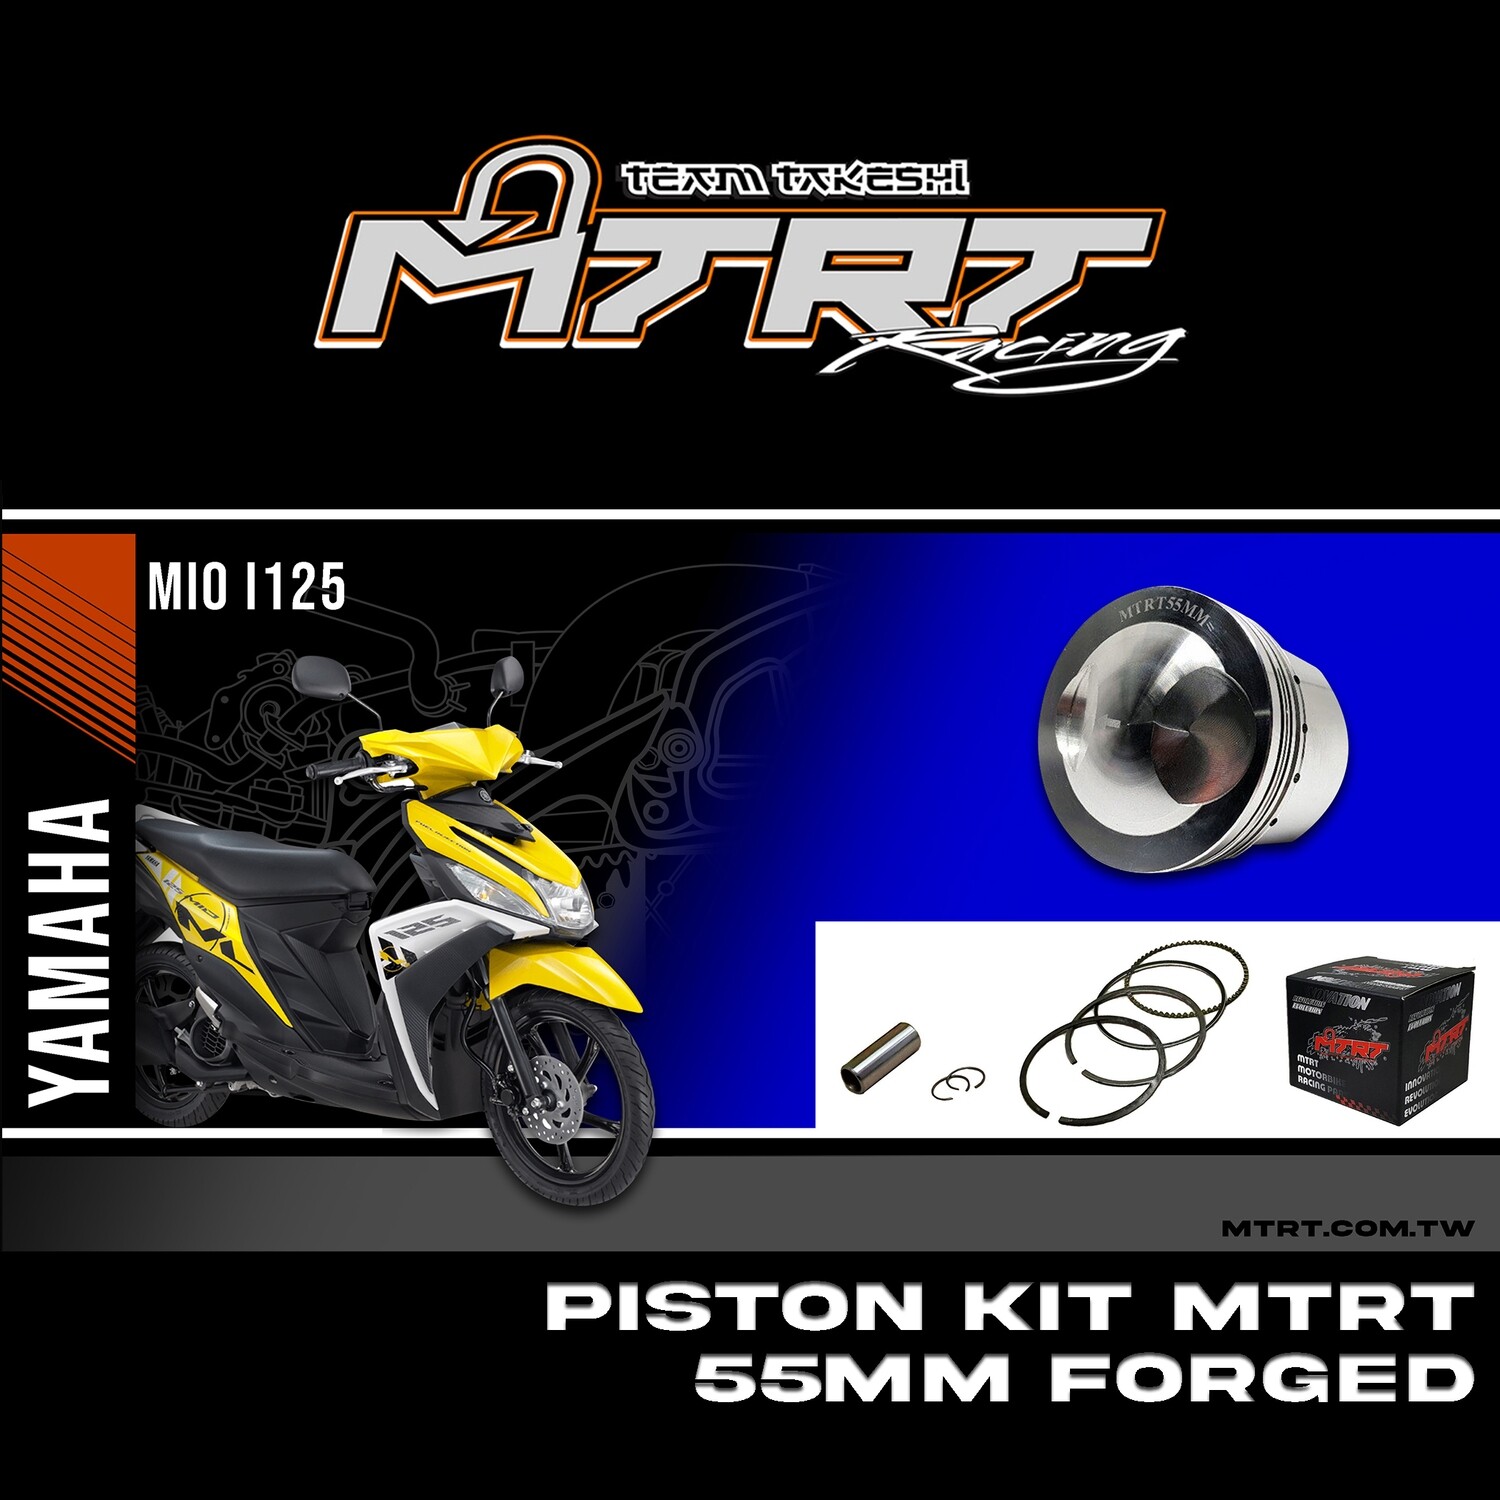 PISTON  KIT  MIOi125  55MM FORGED pin13  MTRT